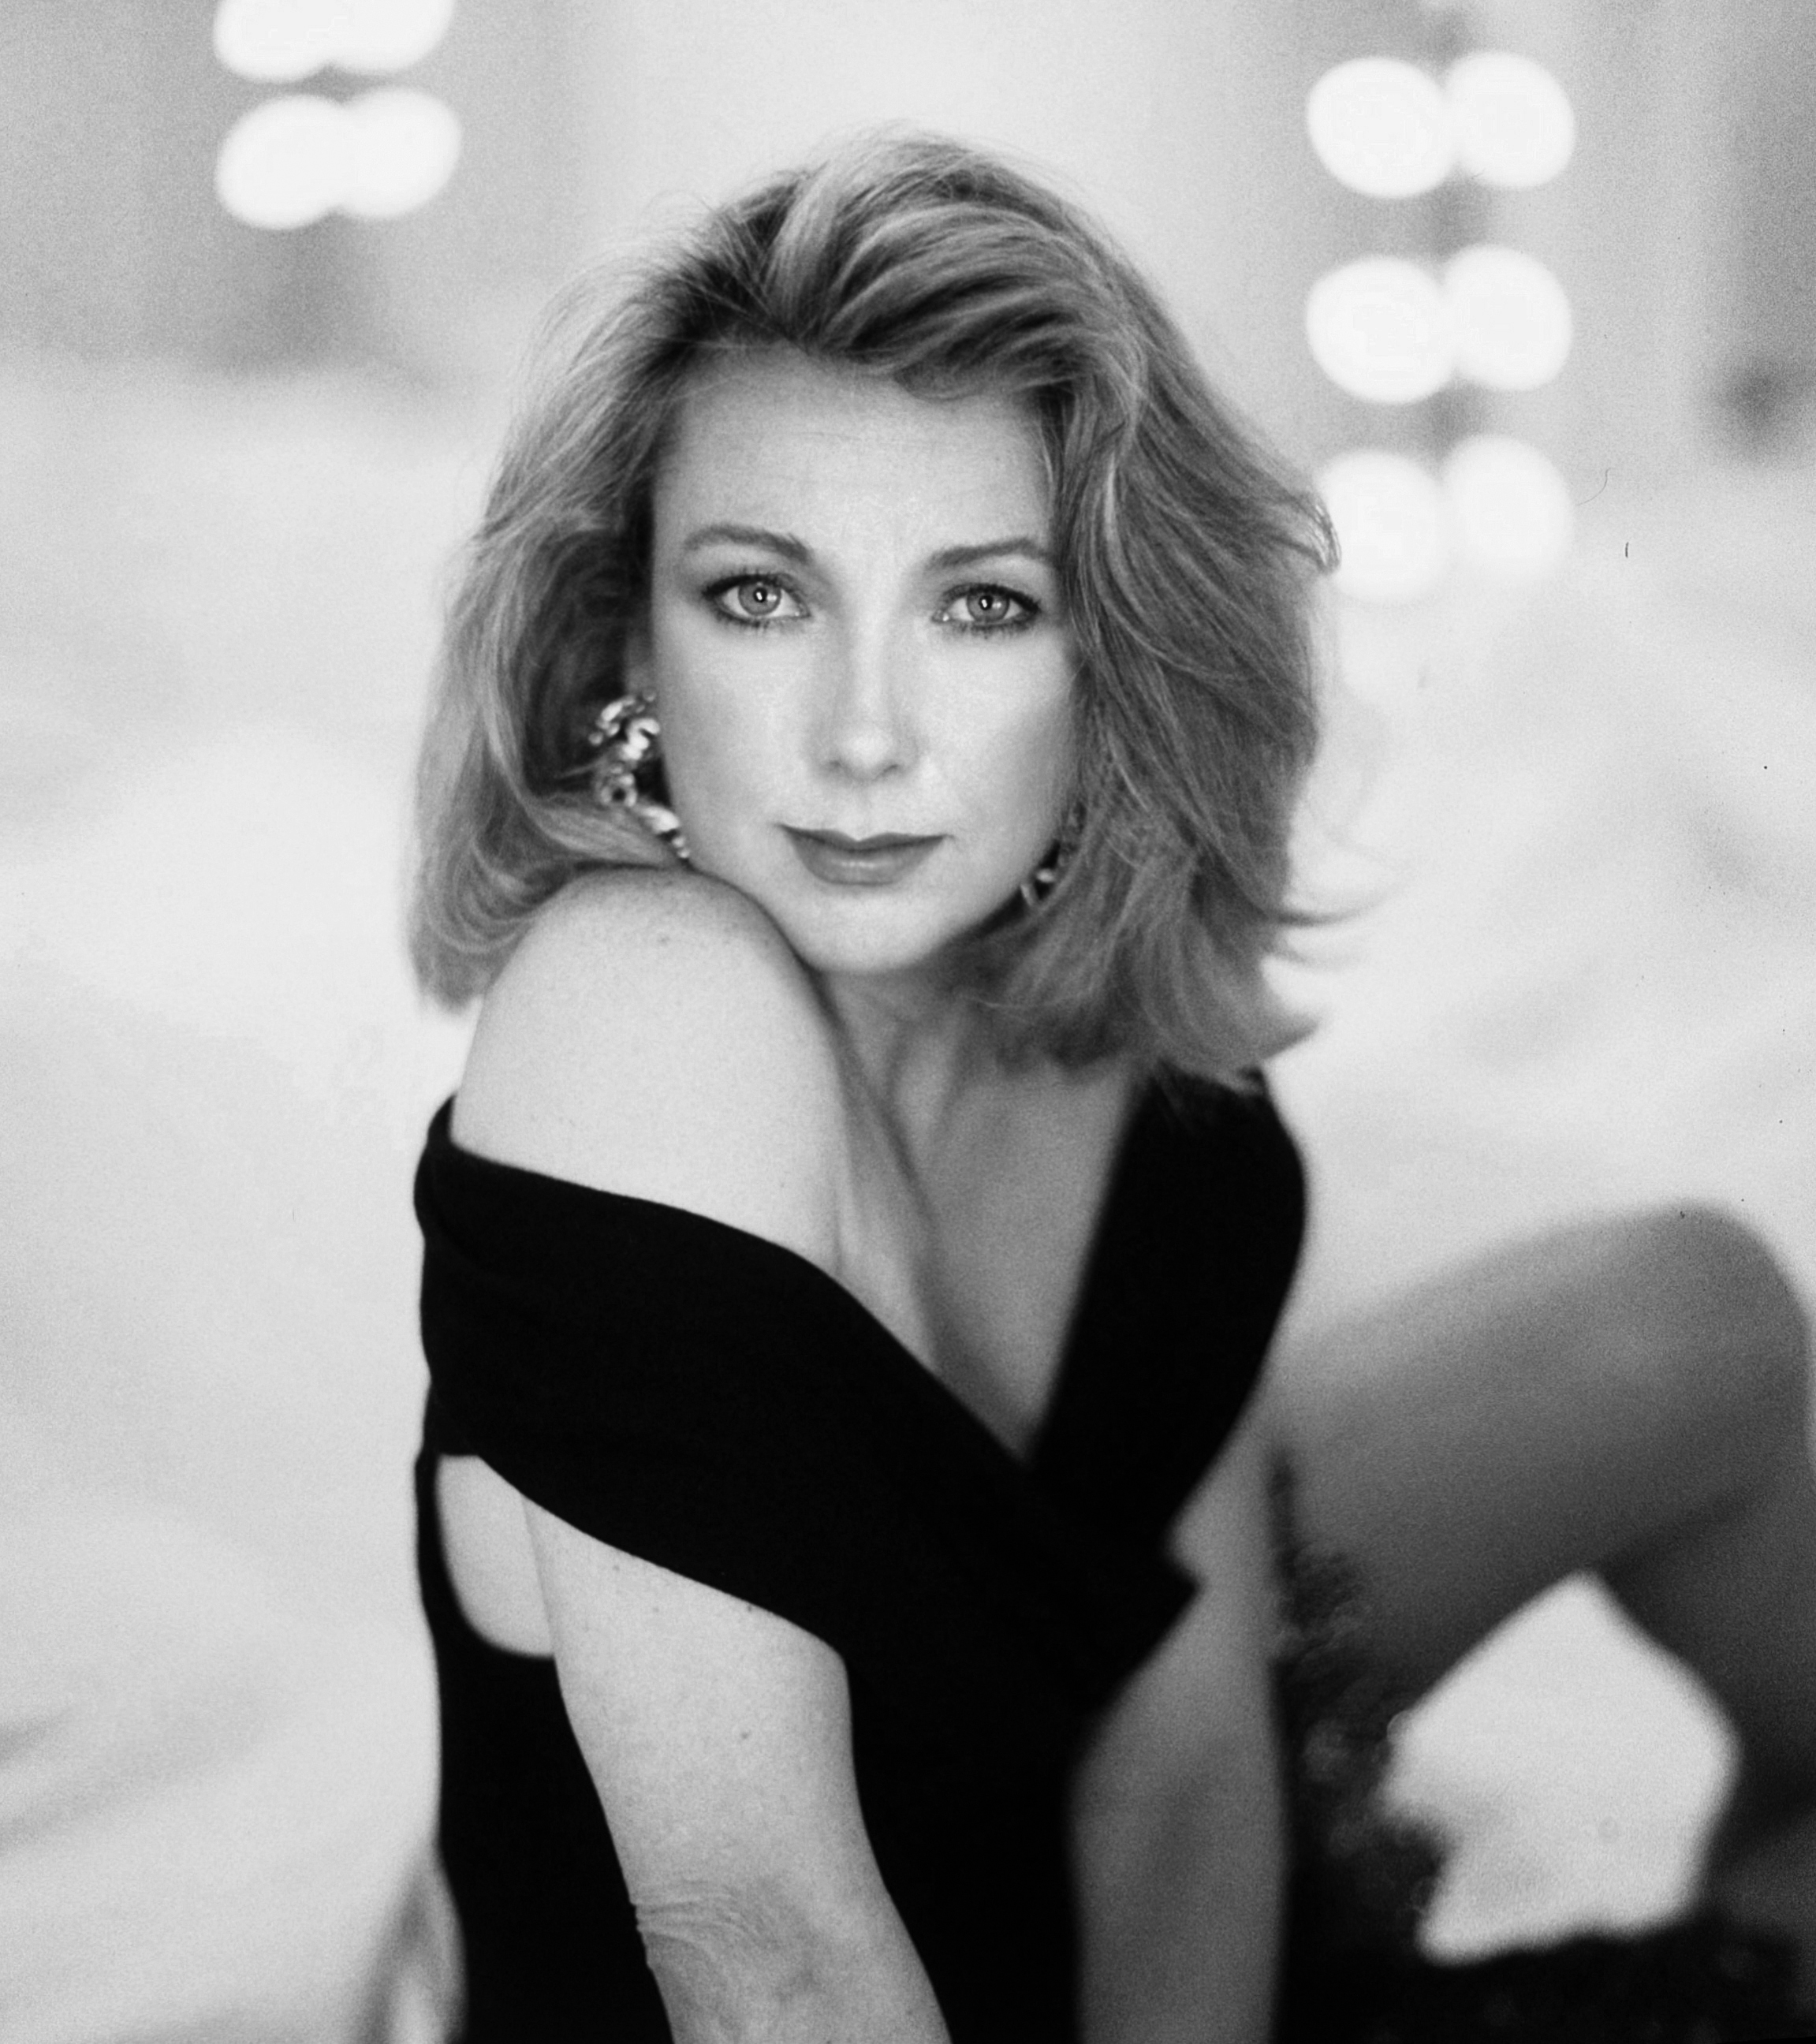 Teri Garr poses for a portrait in Los Angeles, California in 1983. | Source: Getty Images